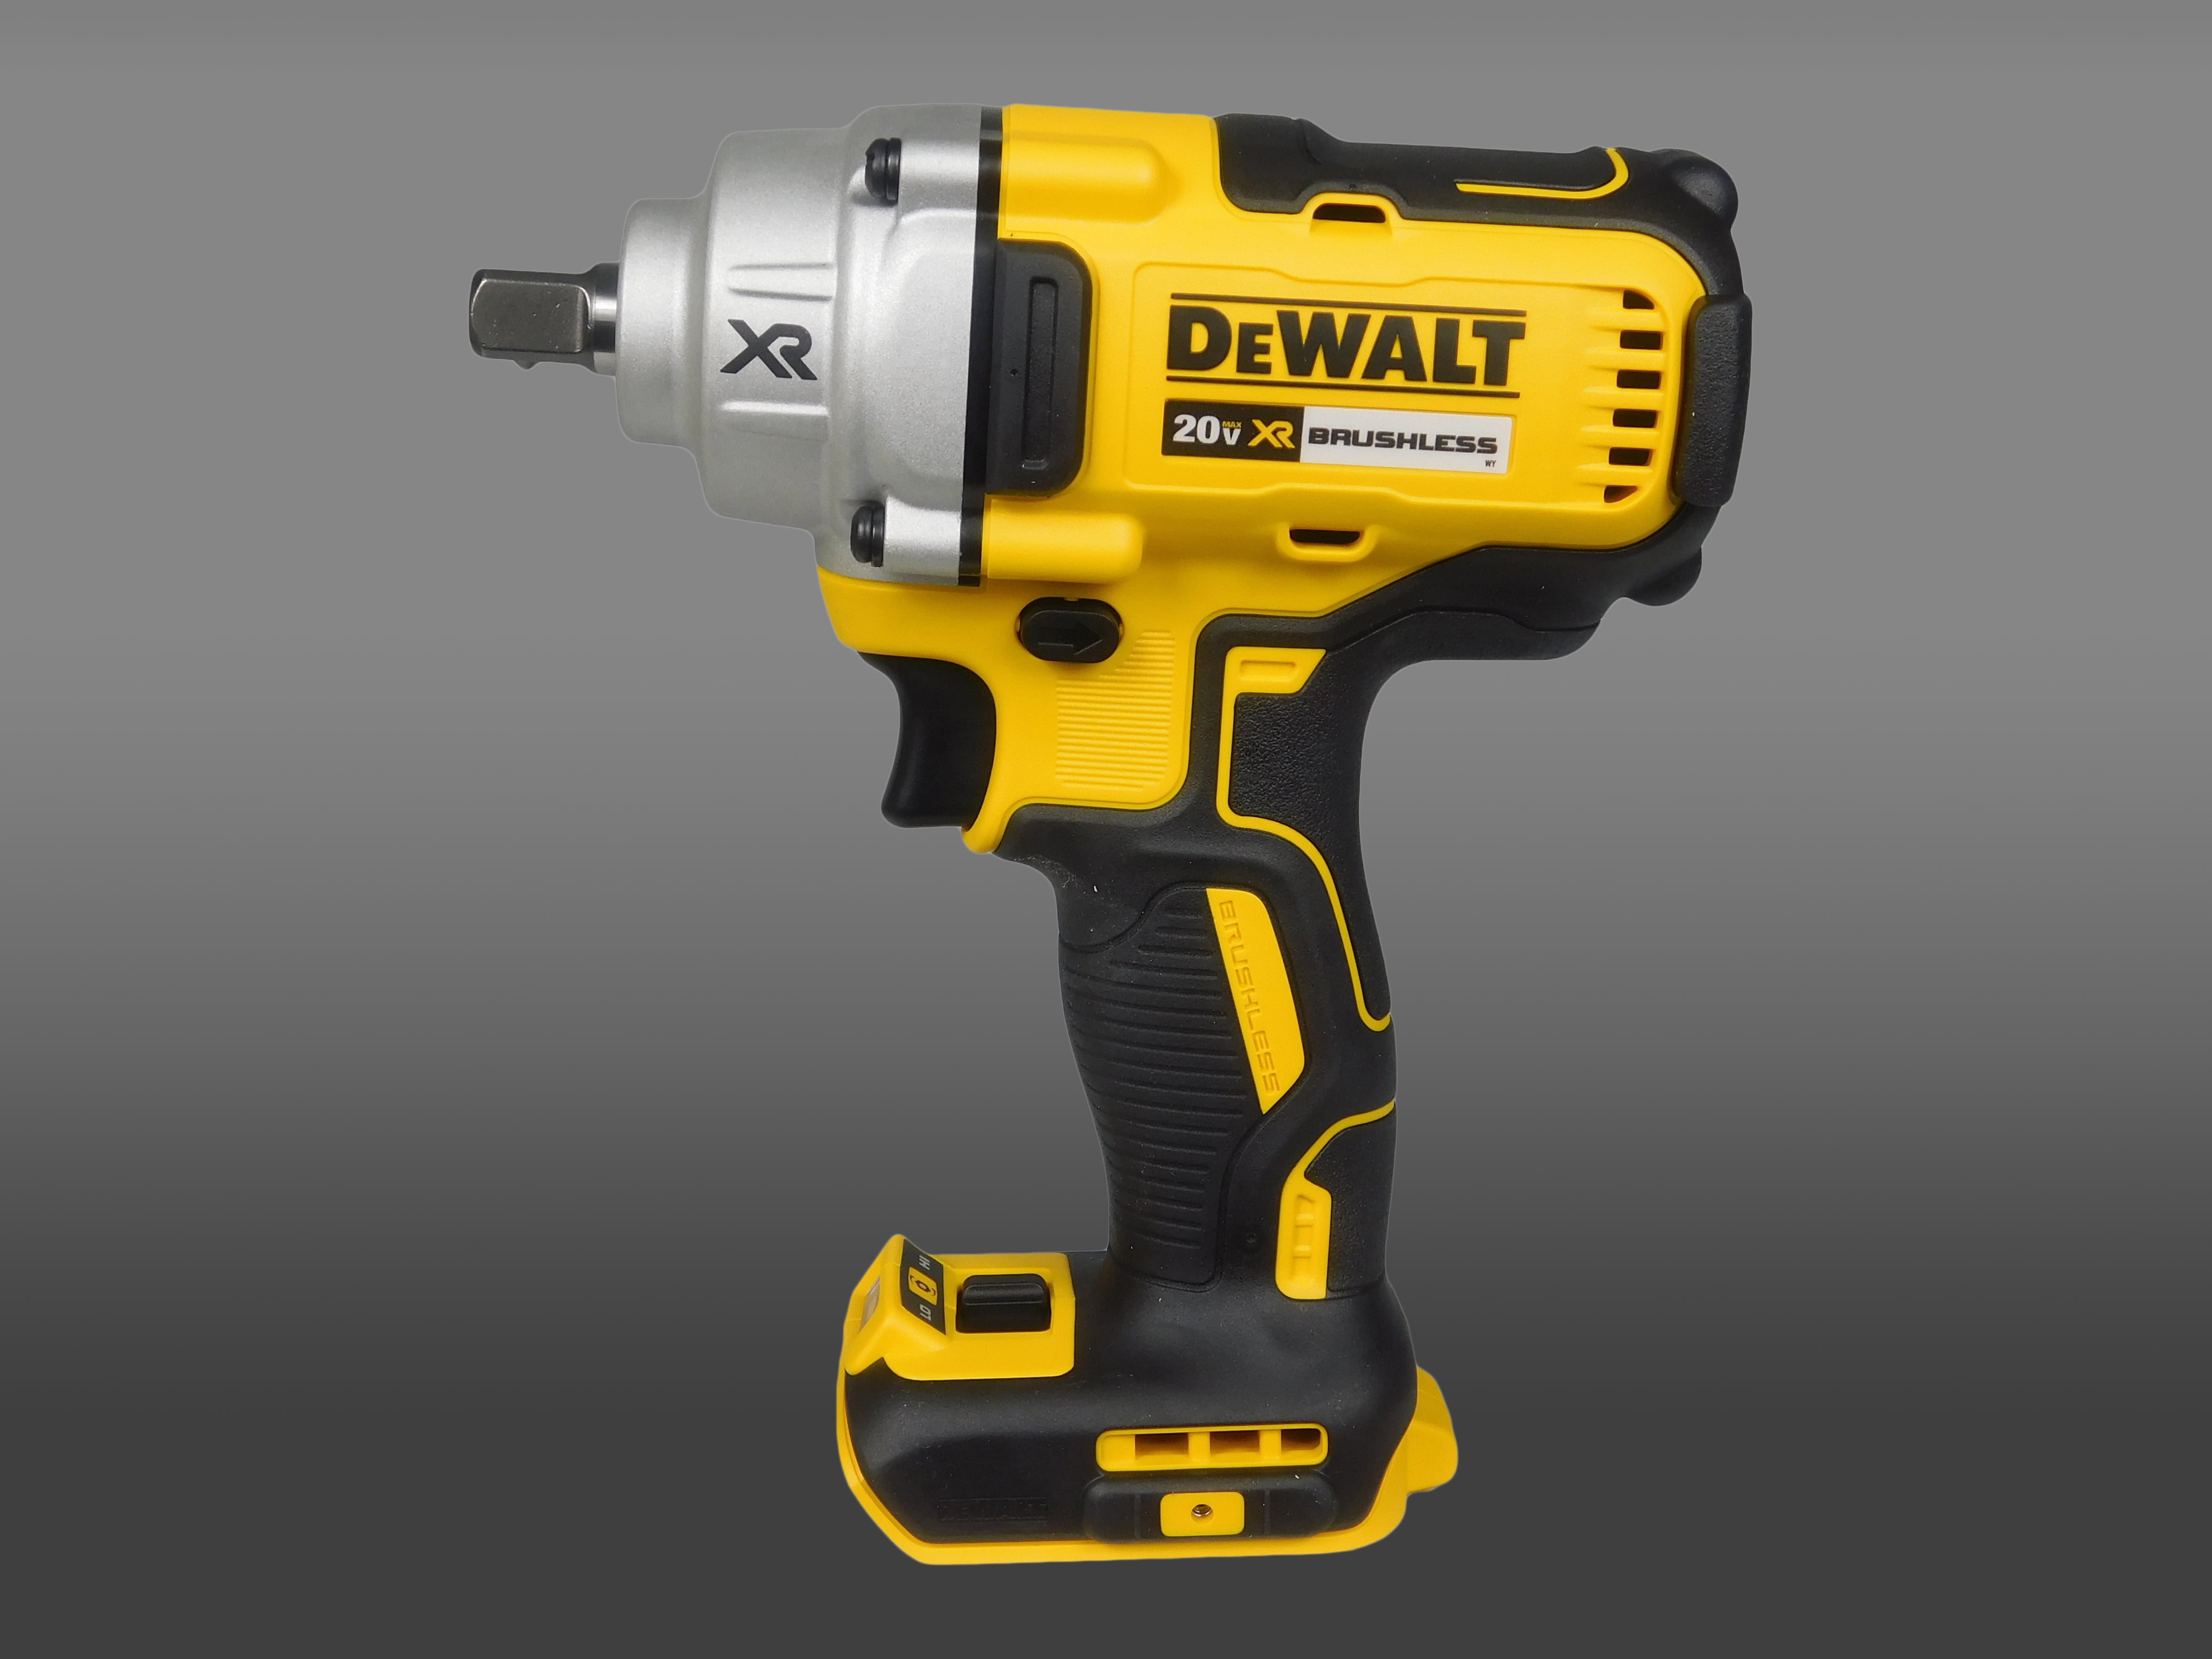 DEWALT DCF894B 1//2/" Mid Range Cordless Impact Wrench with Detent Pin for sale online